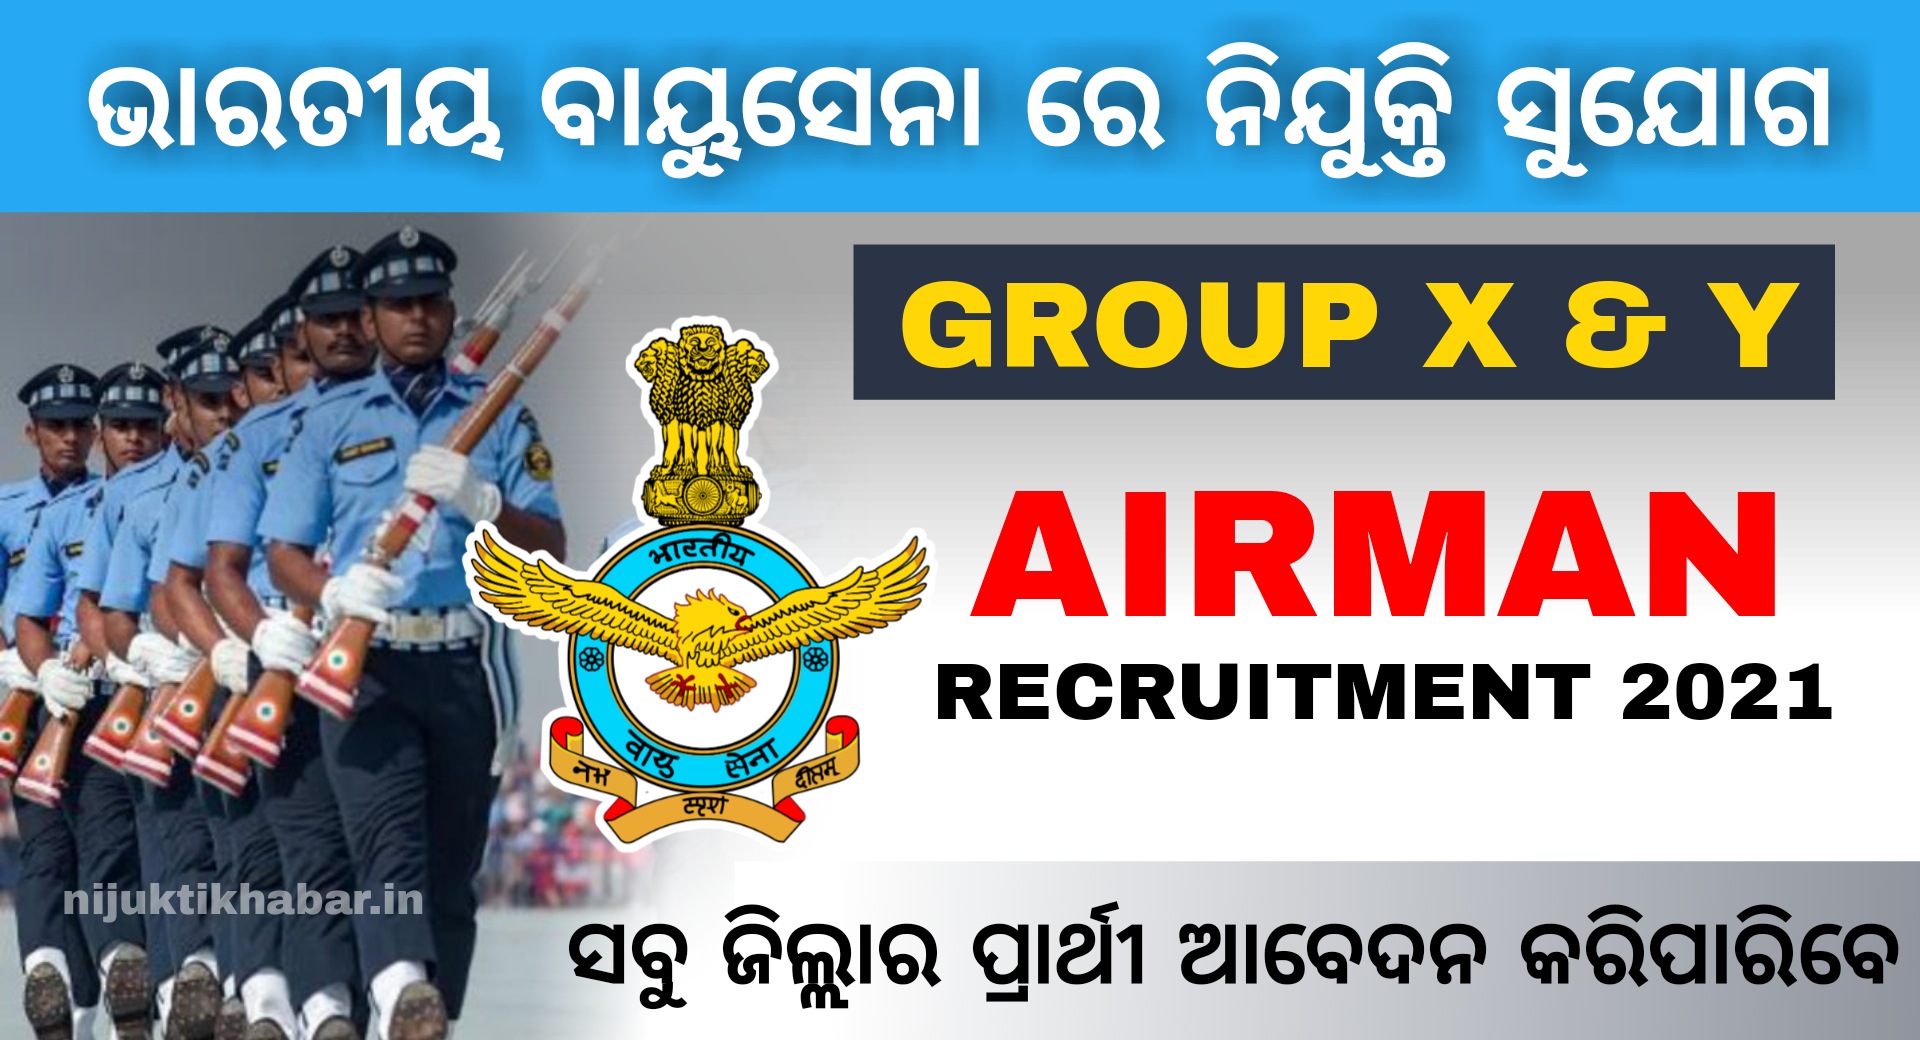 Indian Air Force Airmen Recruitment 2021 – Apply Online for Group X & Y Vacancies